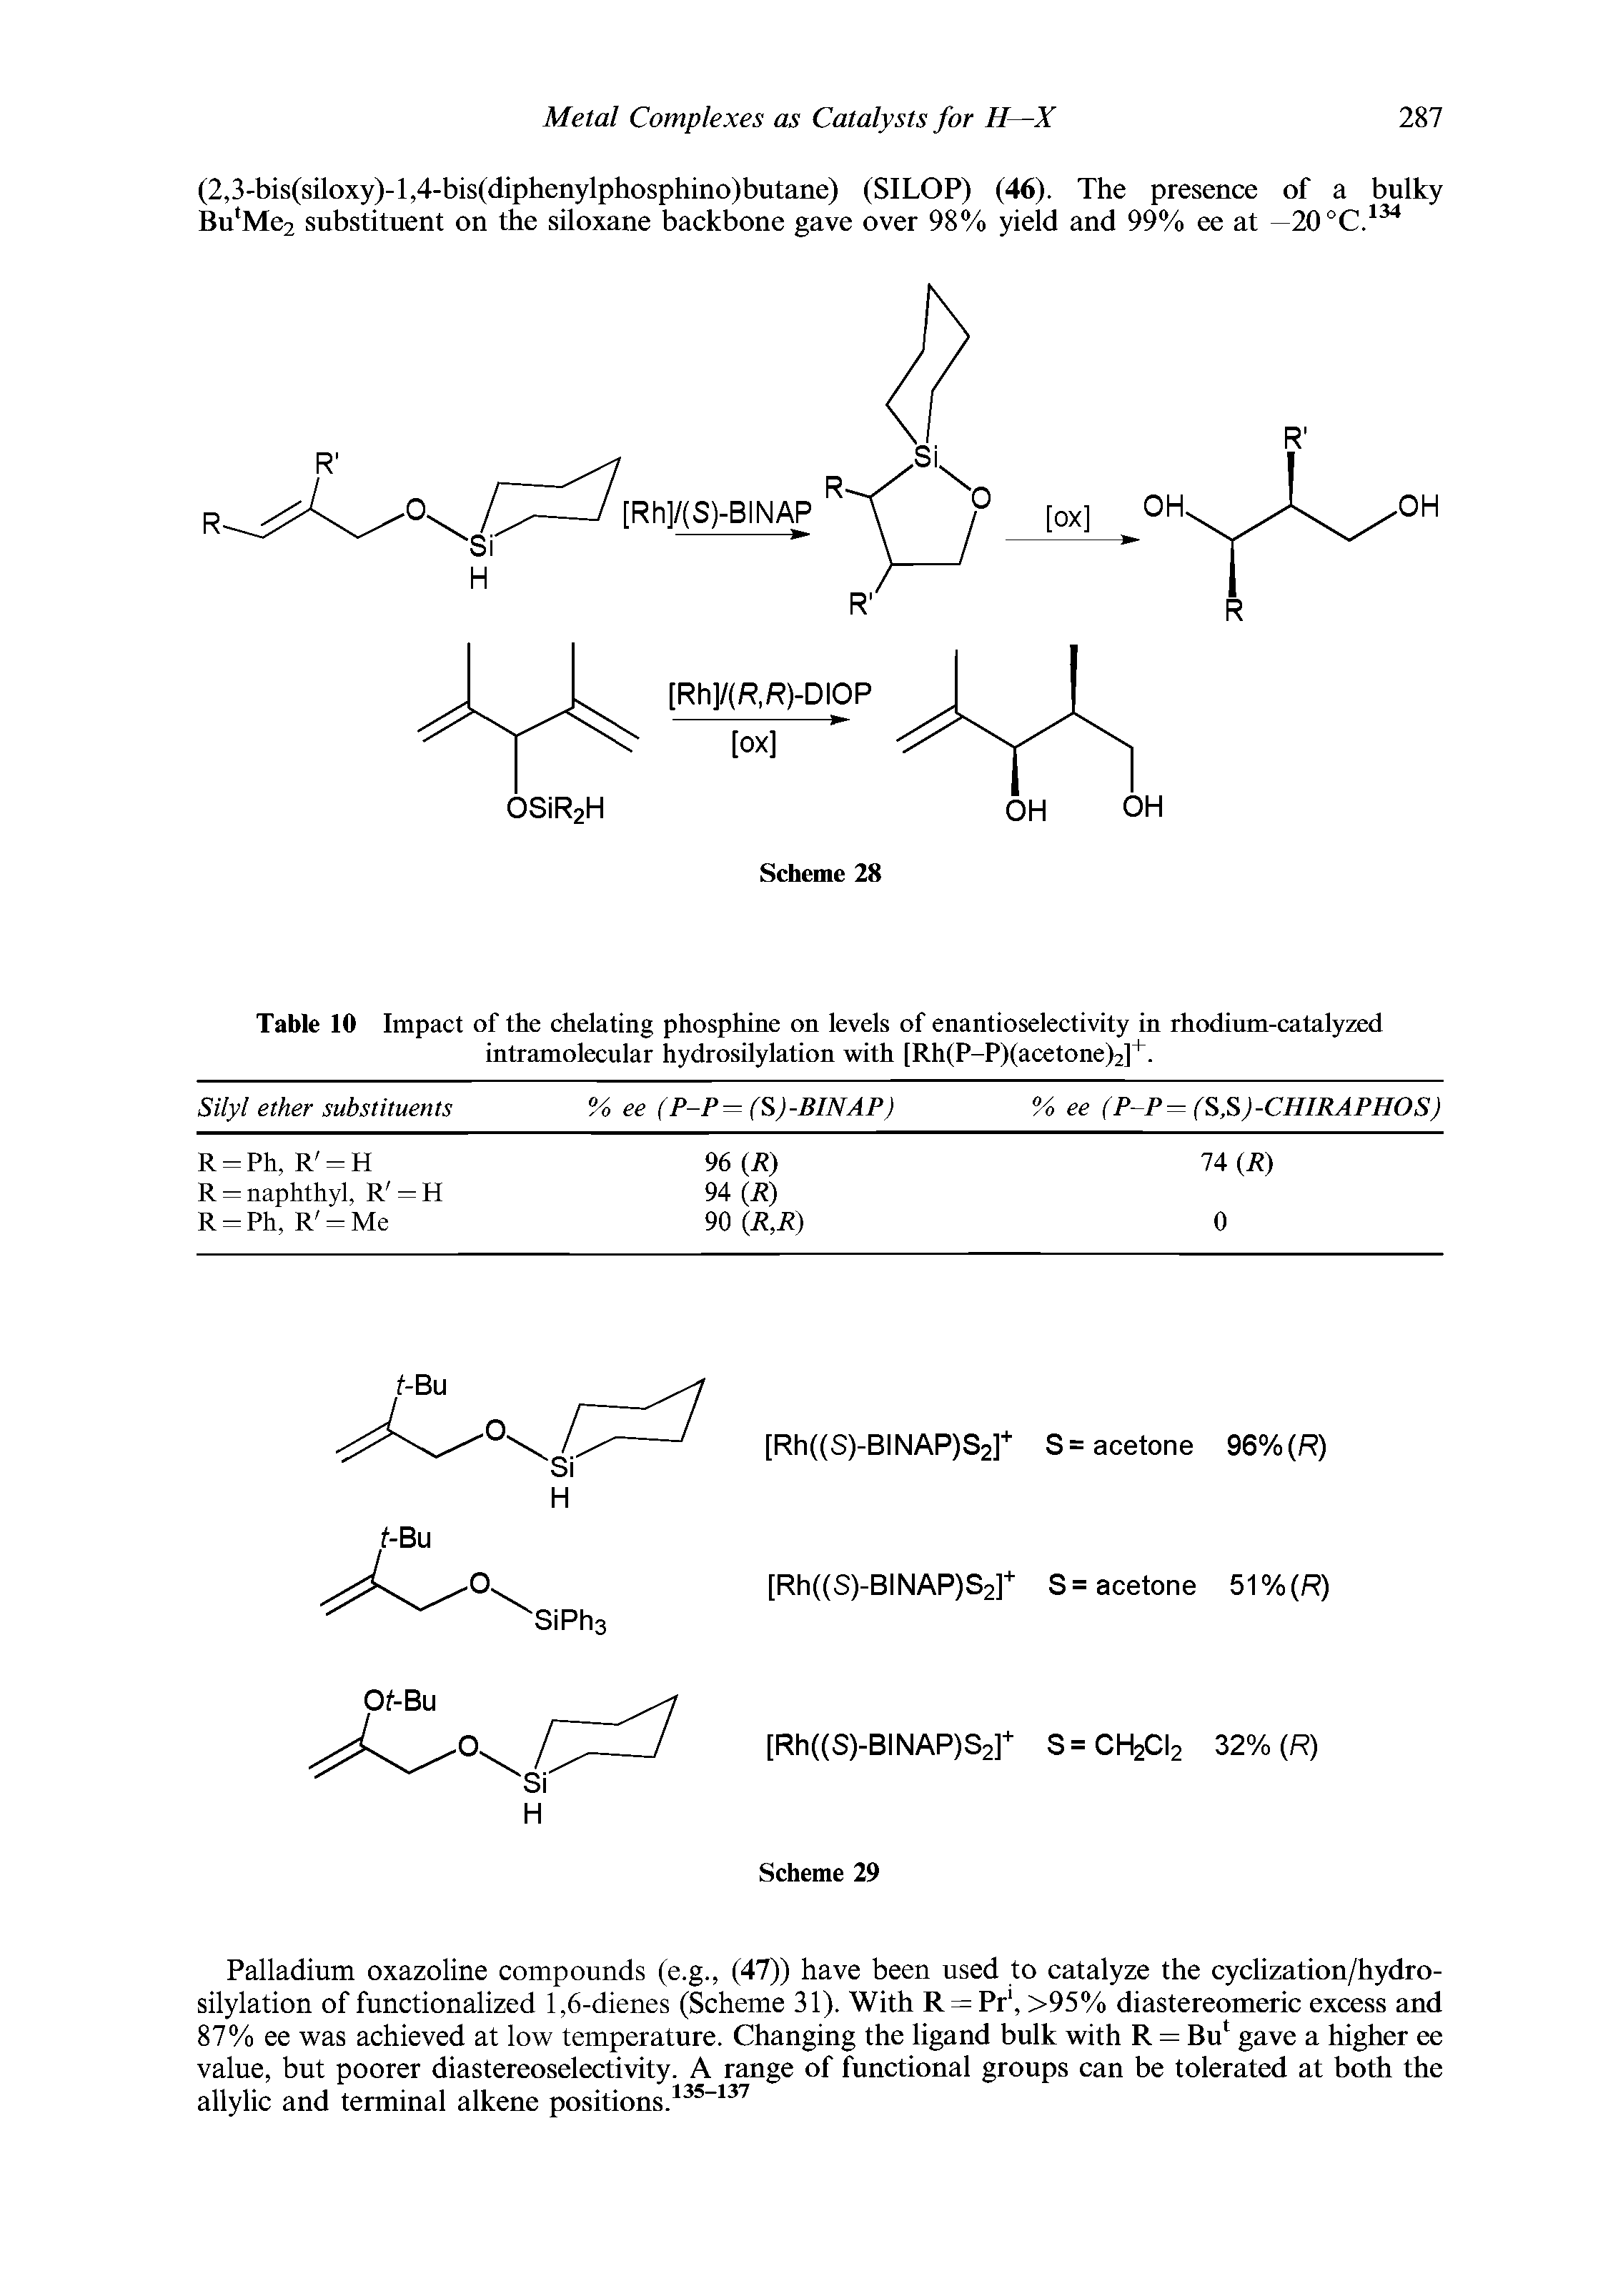 Table 10 Impact of the chelating phosphine on levels of enantioselectivity in rhodium-catalyzed intramolecular hydrosilylation with [Rh(P-P)(acetone)2]+.